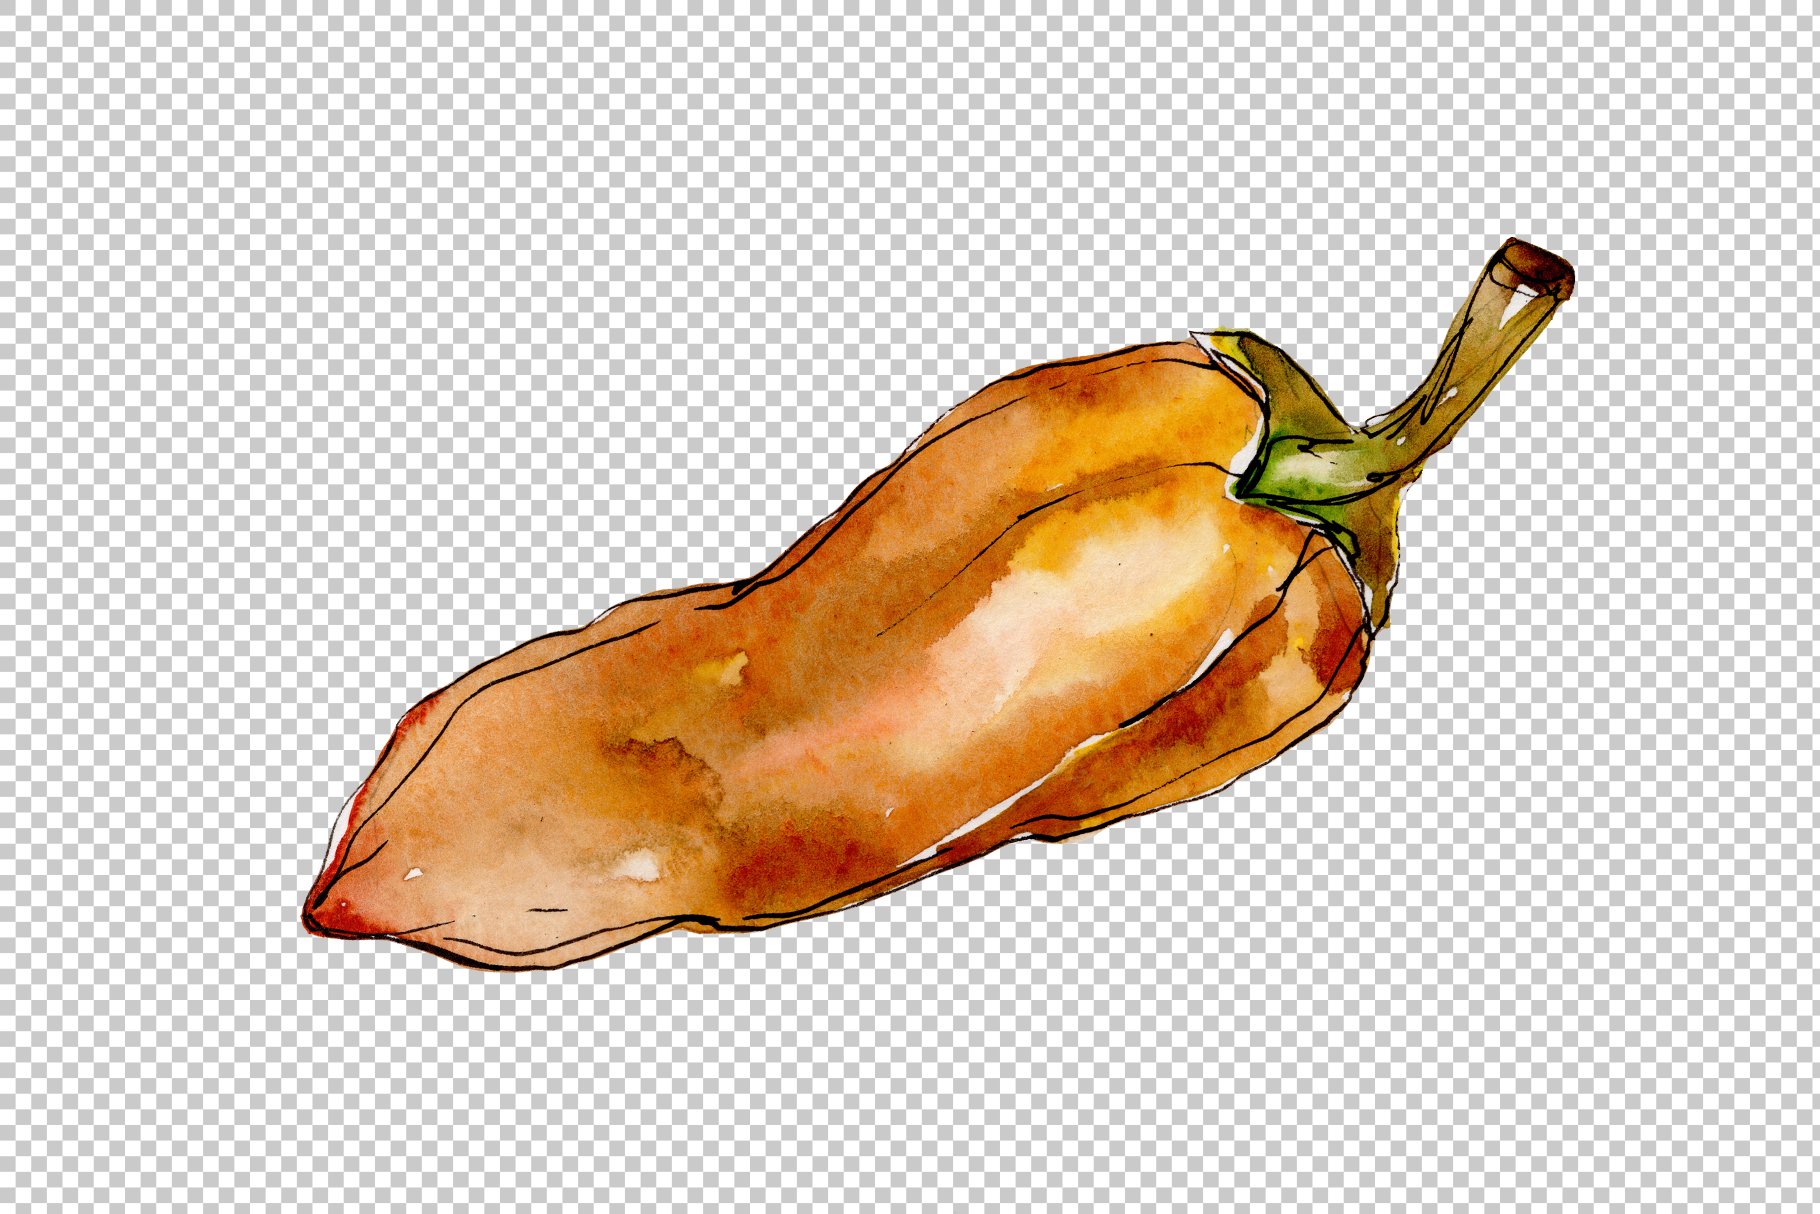 Middle orange pepper in a watercolor style.